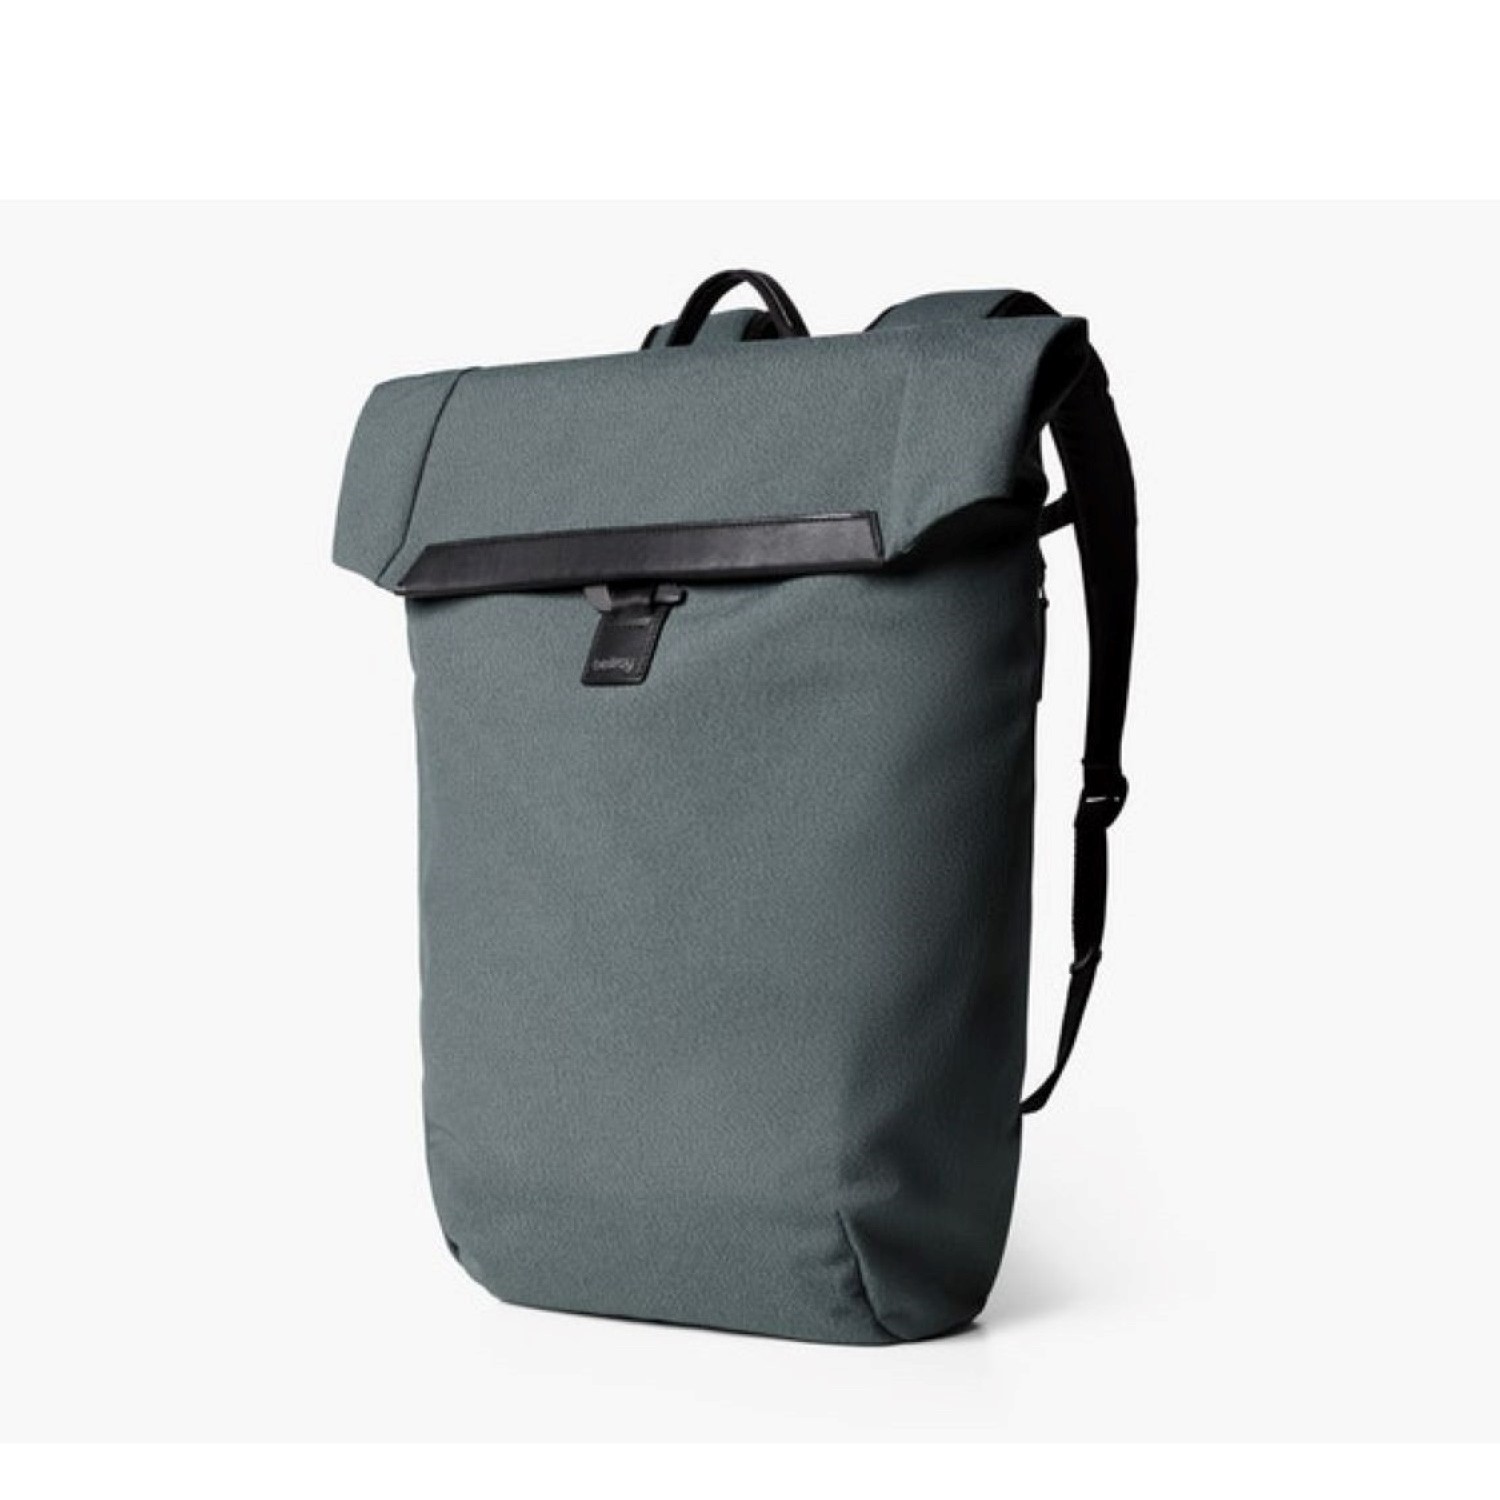 Bellroy Shift Backpack - Mossgrey - Seager Inc